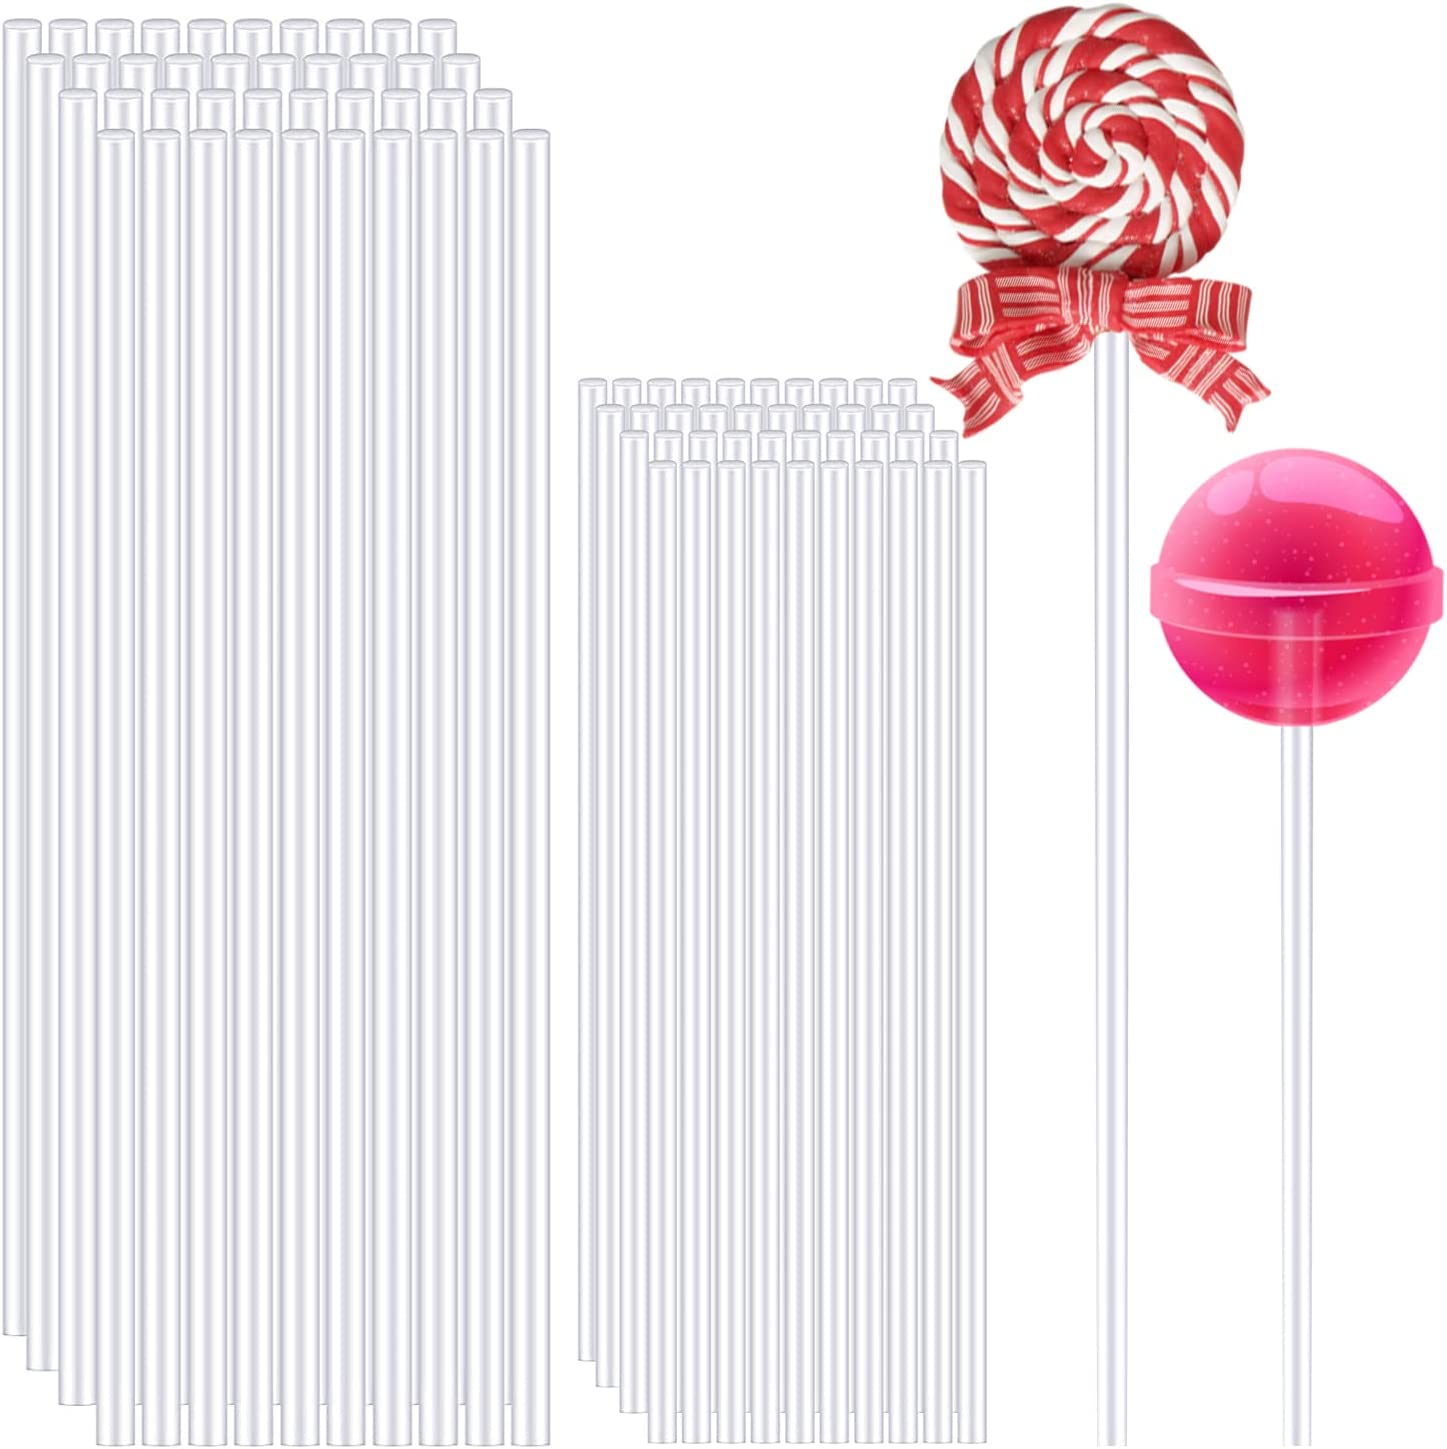 Weststone - Reusable 50pcs Clear Acrylic Sticks for Cake Pop, Lollipop Candy or Cake Topper